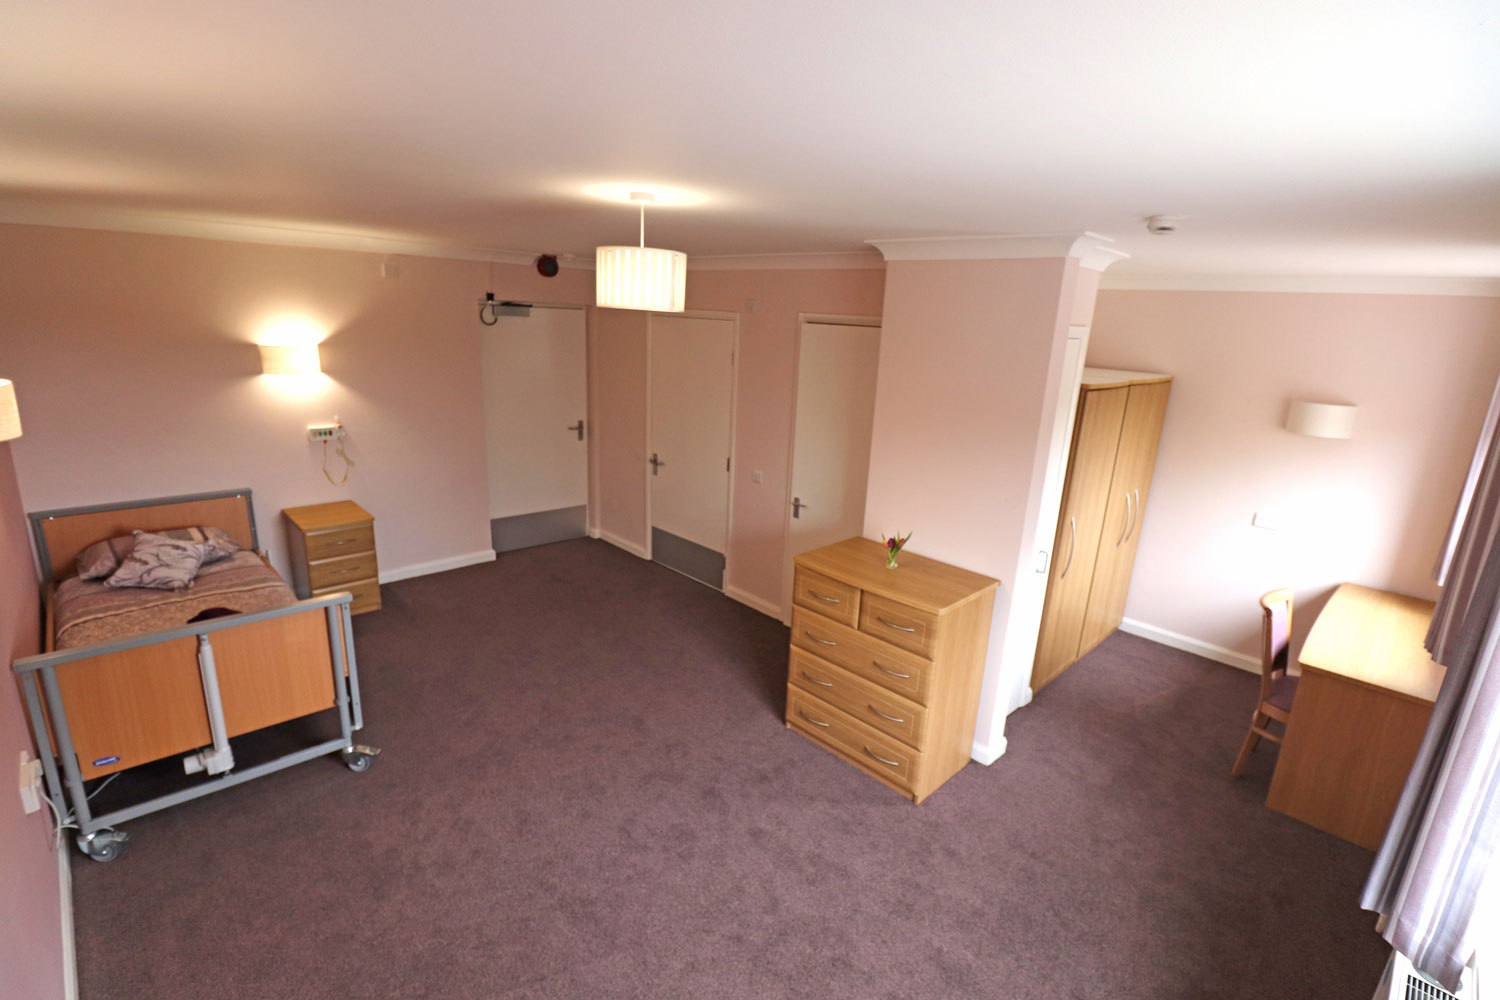 Our latest rooms, The Newman Wing